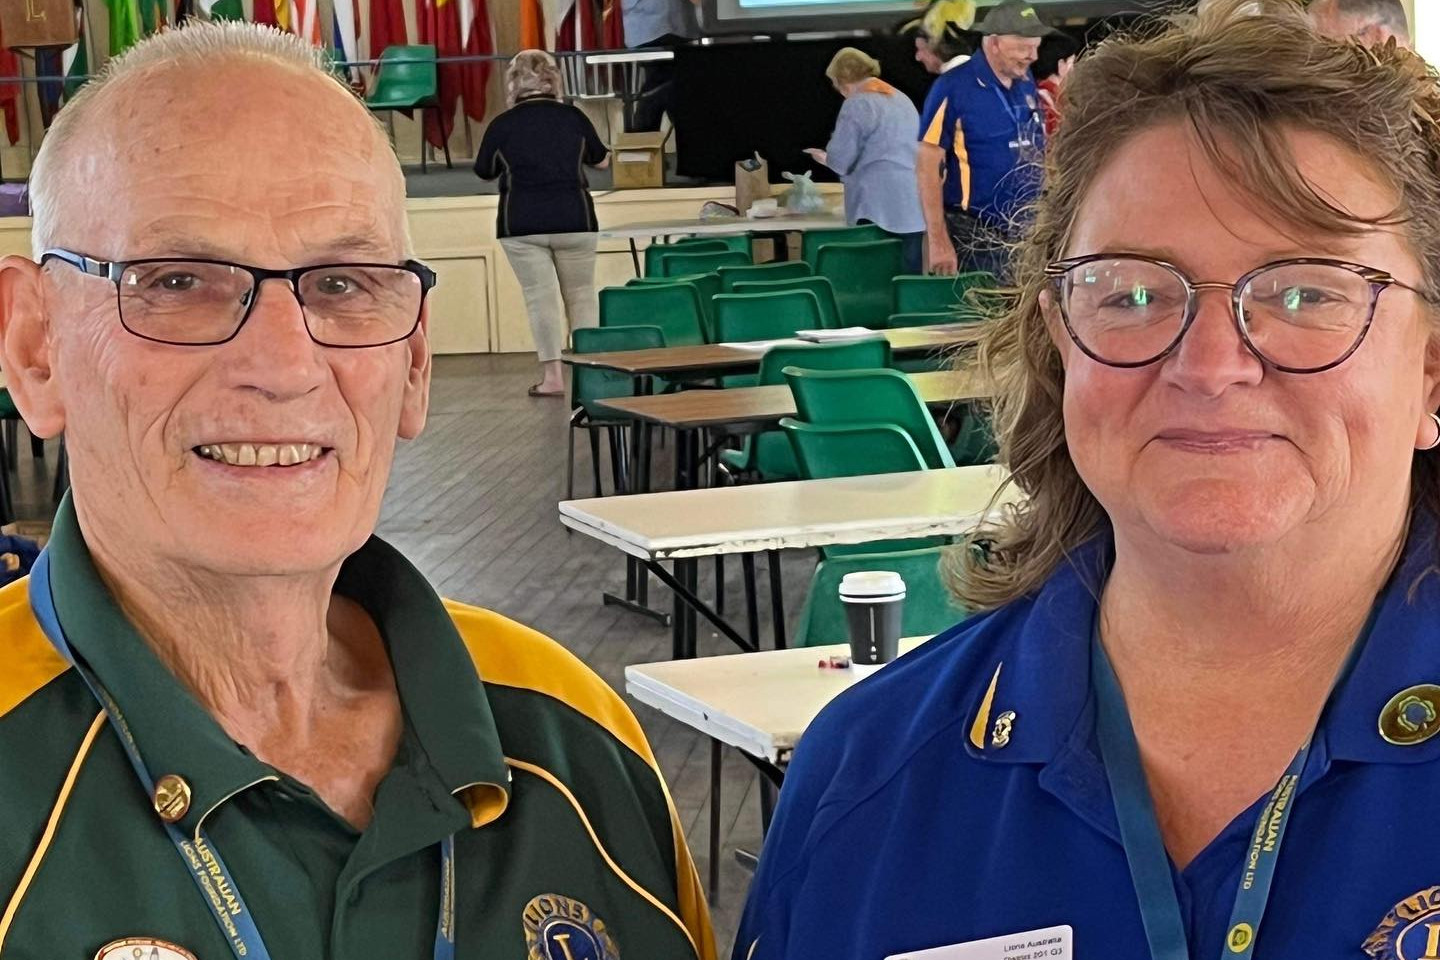 Lions Club of Wamuran award winner Lisa Gourley (right) with district governor Graeme Emery.